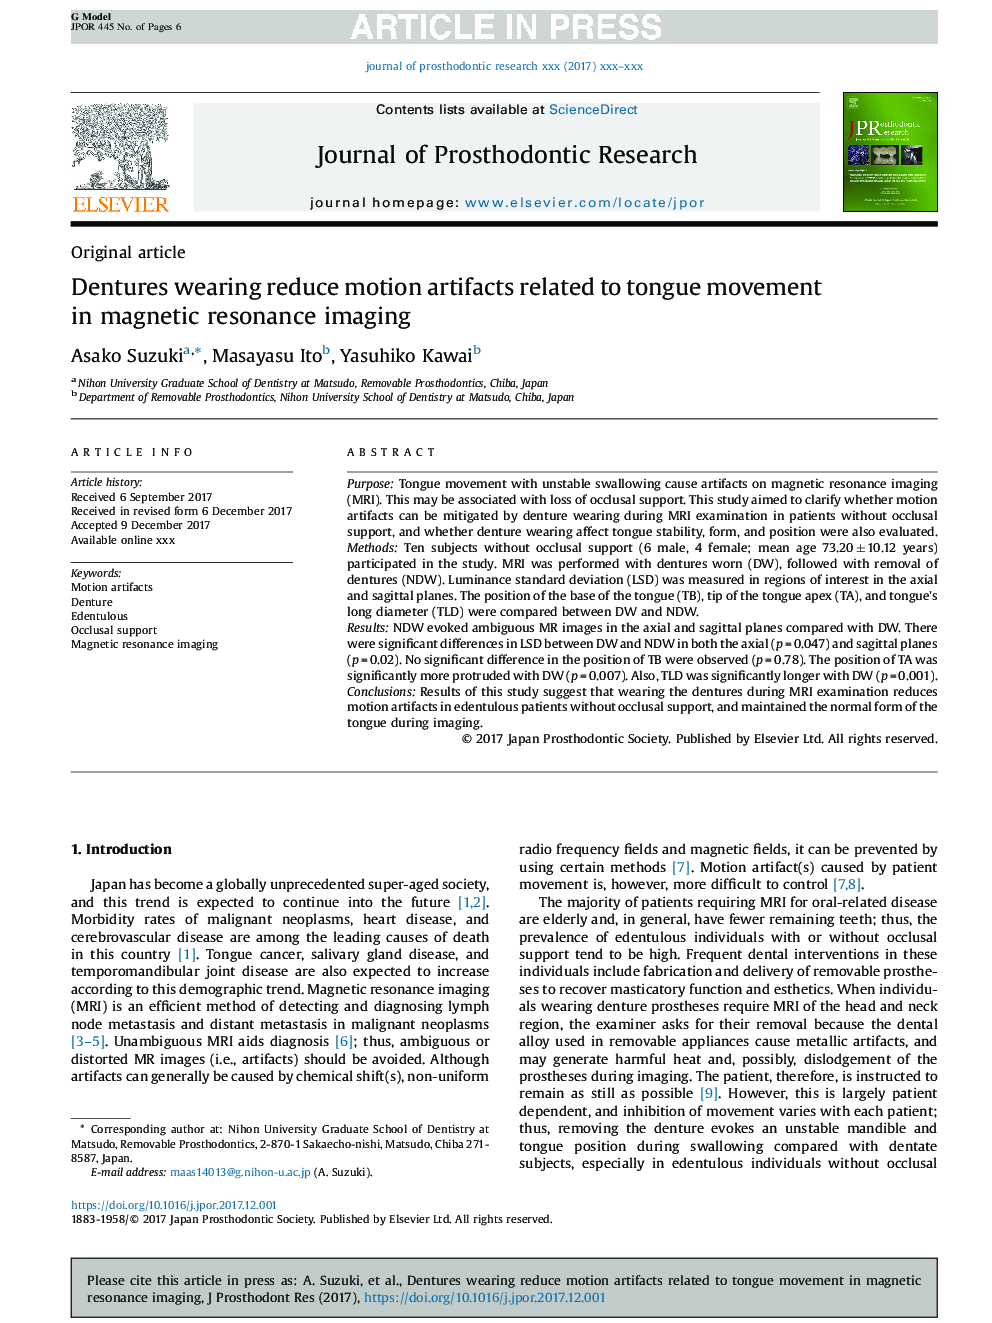 Dentures wearing reduce motion artifacts related to tongue movement in magnetic resonance imaging